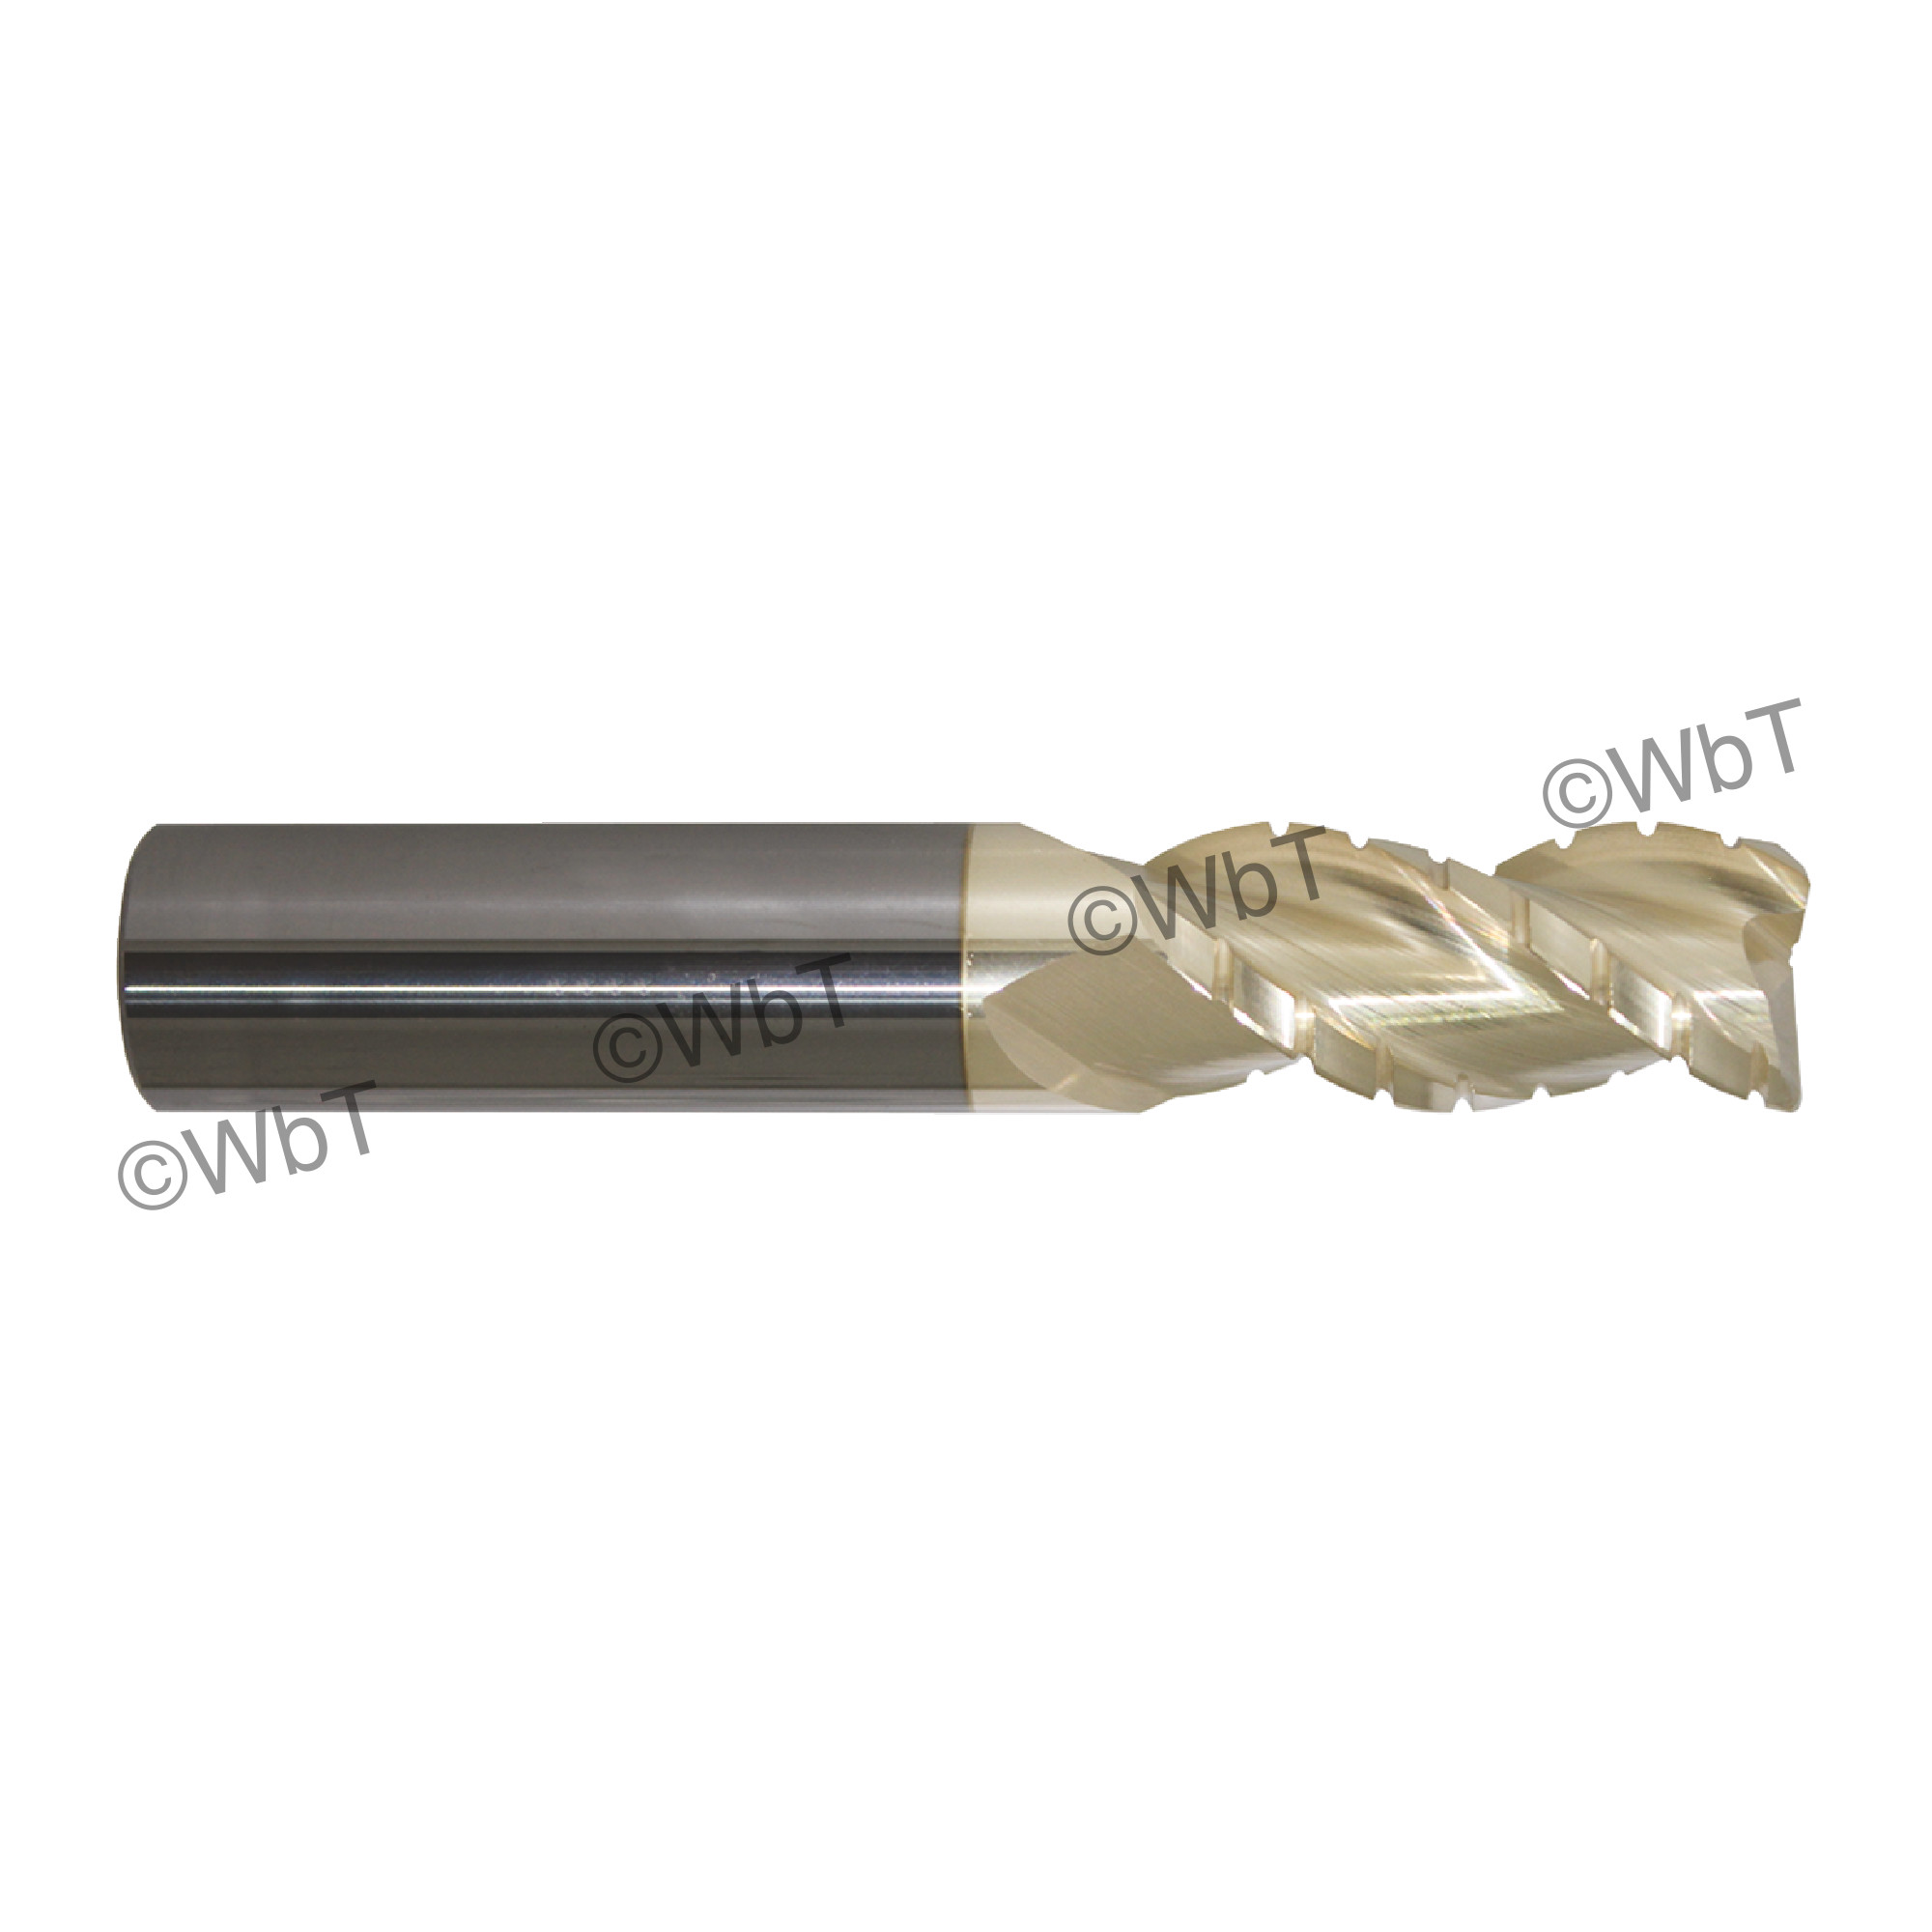 Promax Solid Carbide 3 Flute Roughing-Finishing Corner Radius End Mill 5/16" 119-02026 Series 119